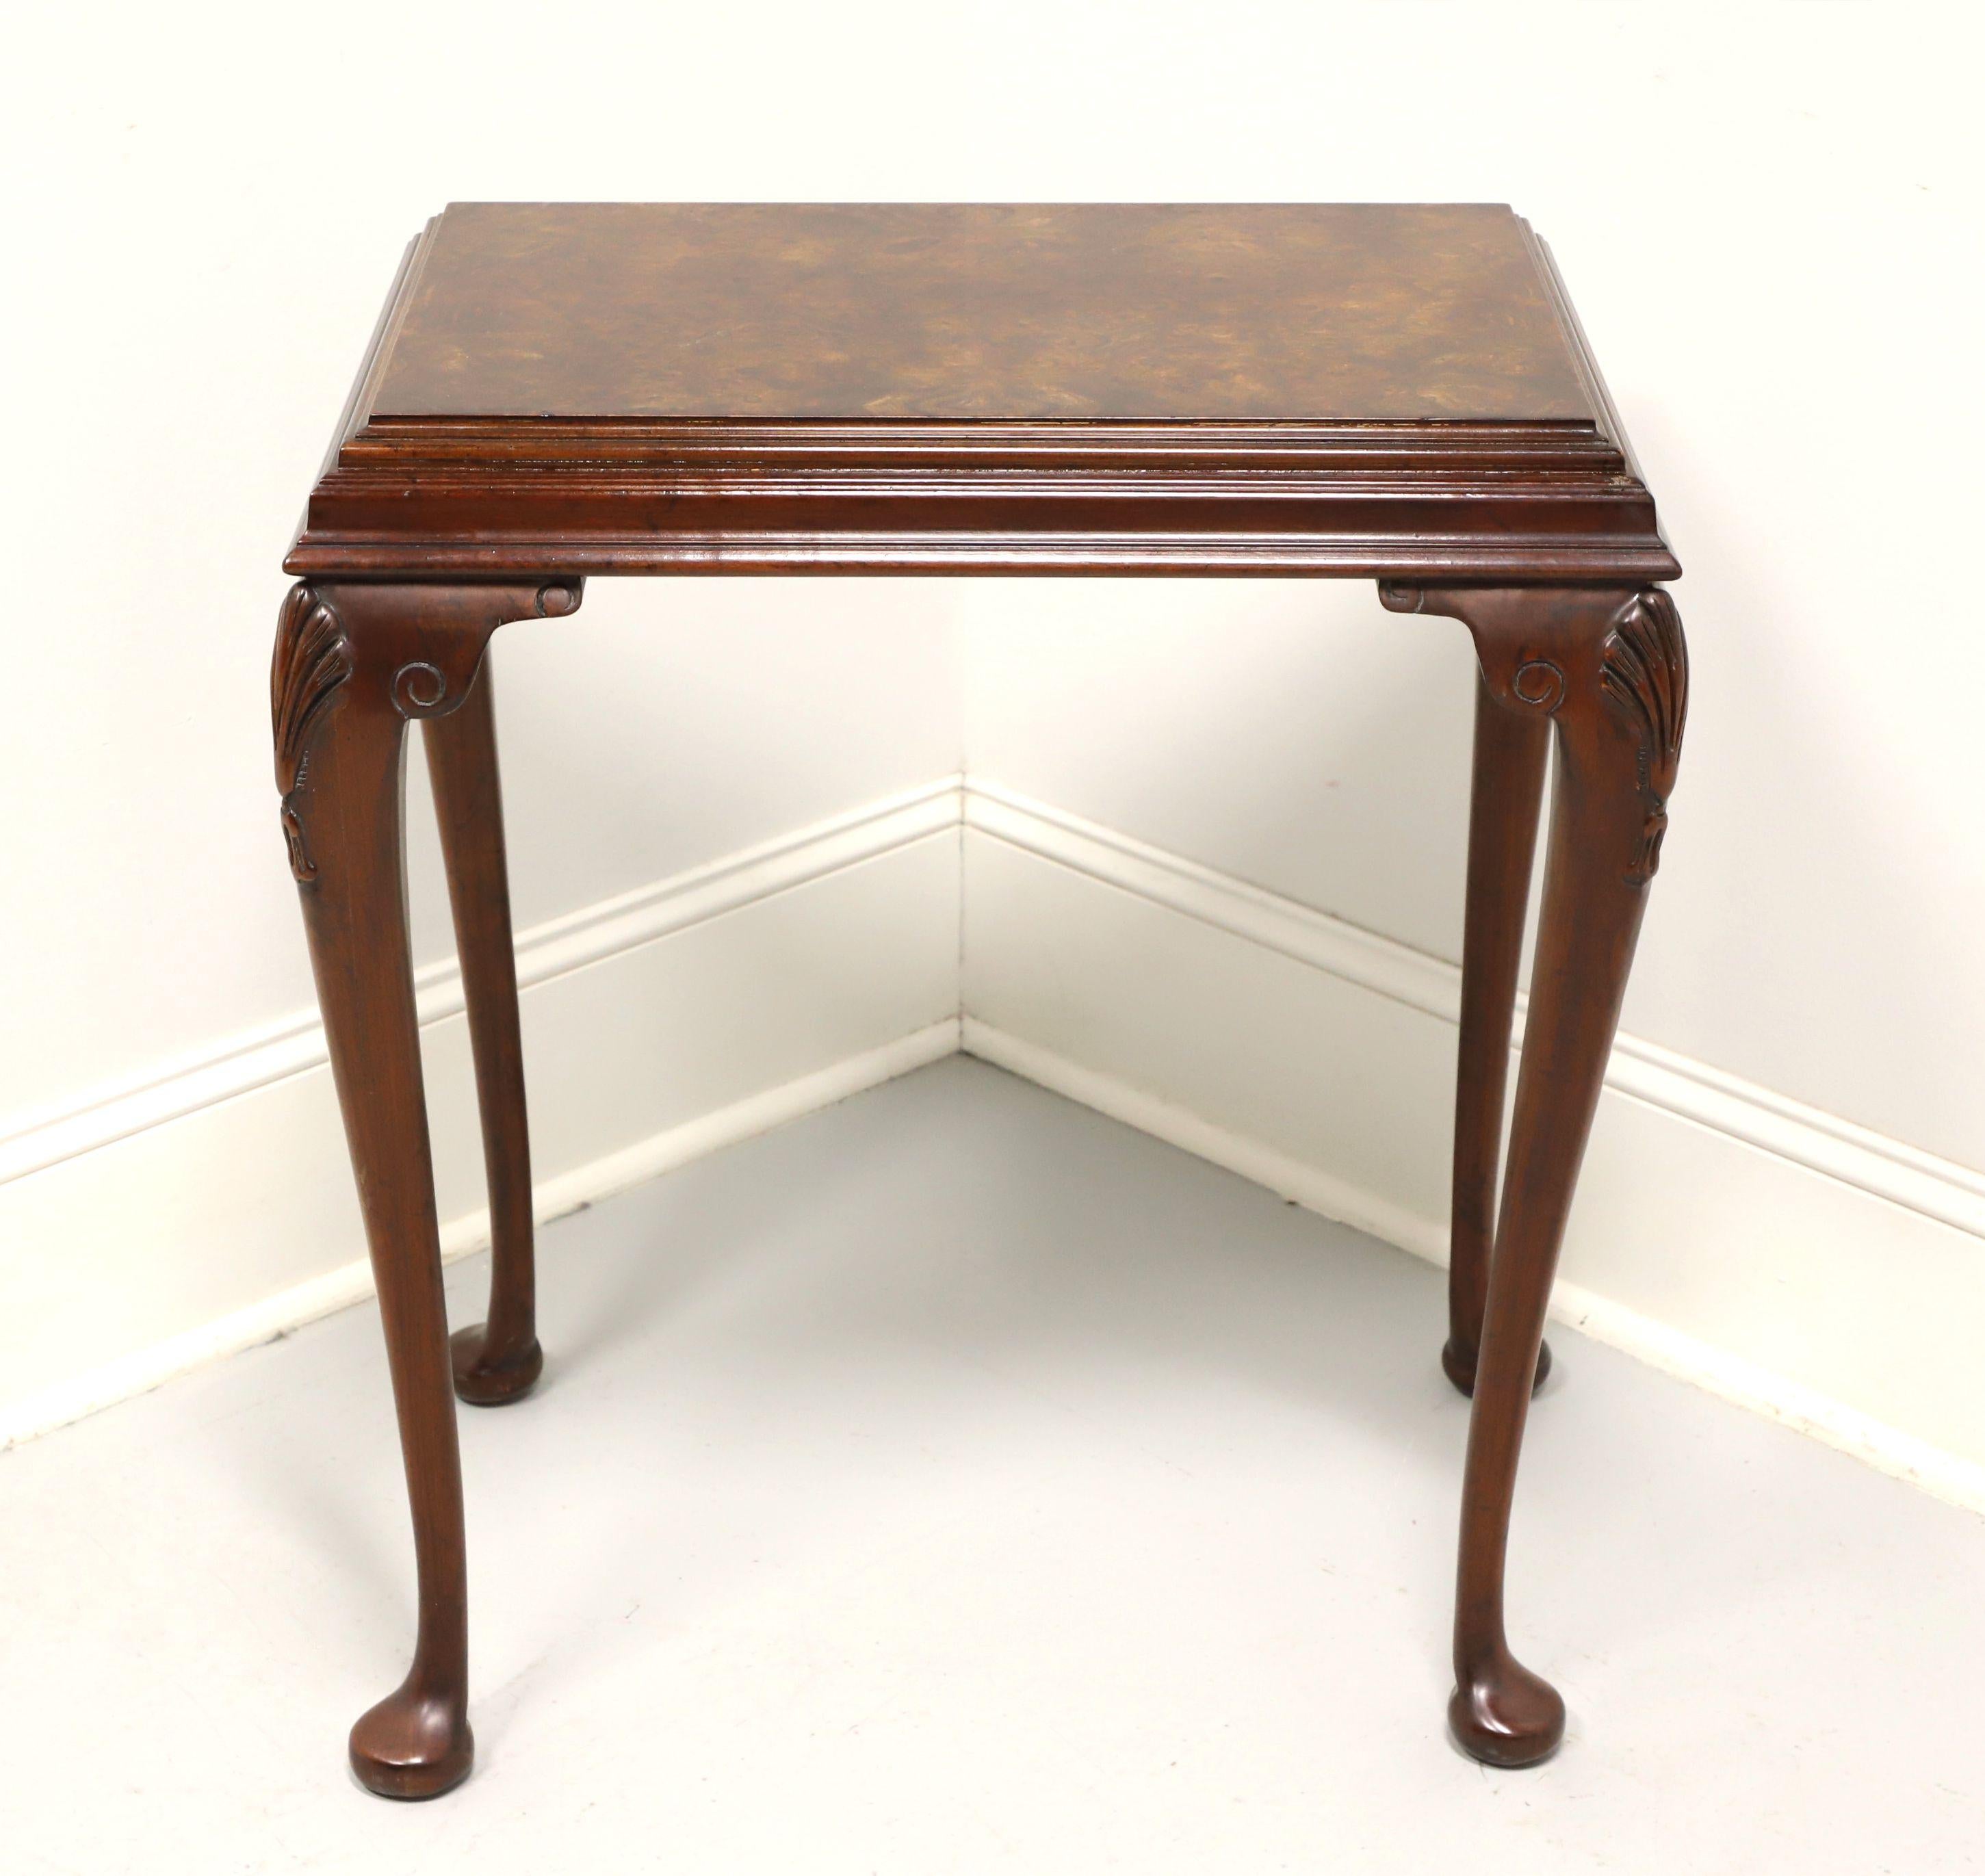 A Queen Anne style side table, unbranded, similar quality to Hekman. Mahogany with inlaid burlwood top, tiered sides, fan carved knees, cabriole legs and pad feet. Features the inlaid burlwood top and tiered sides providing a layered design. Likely